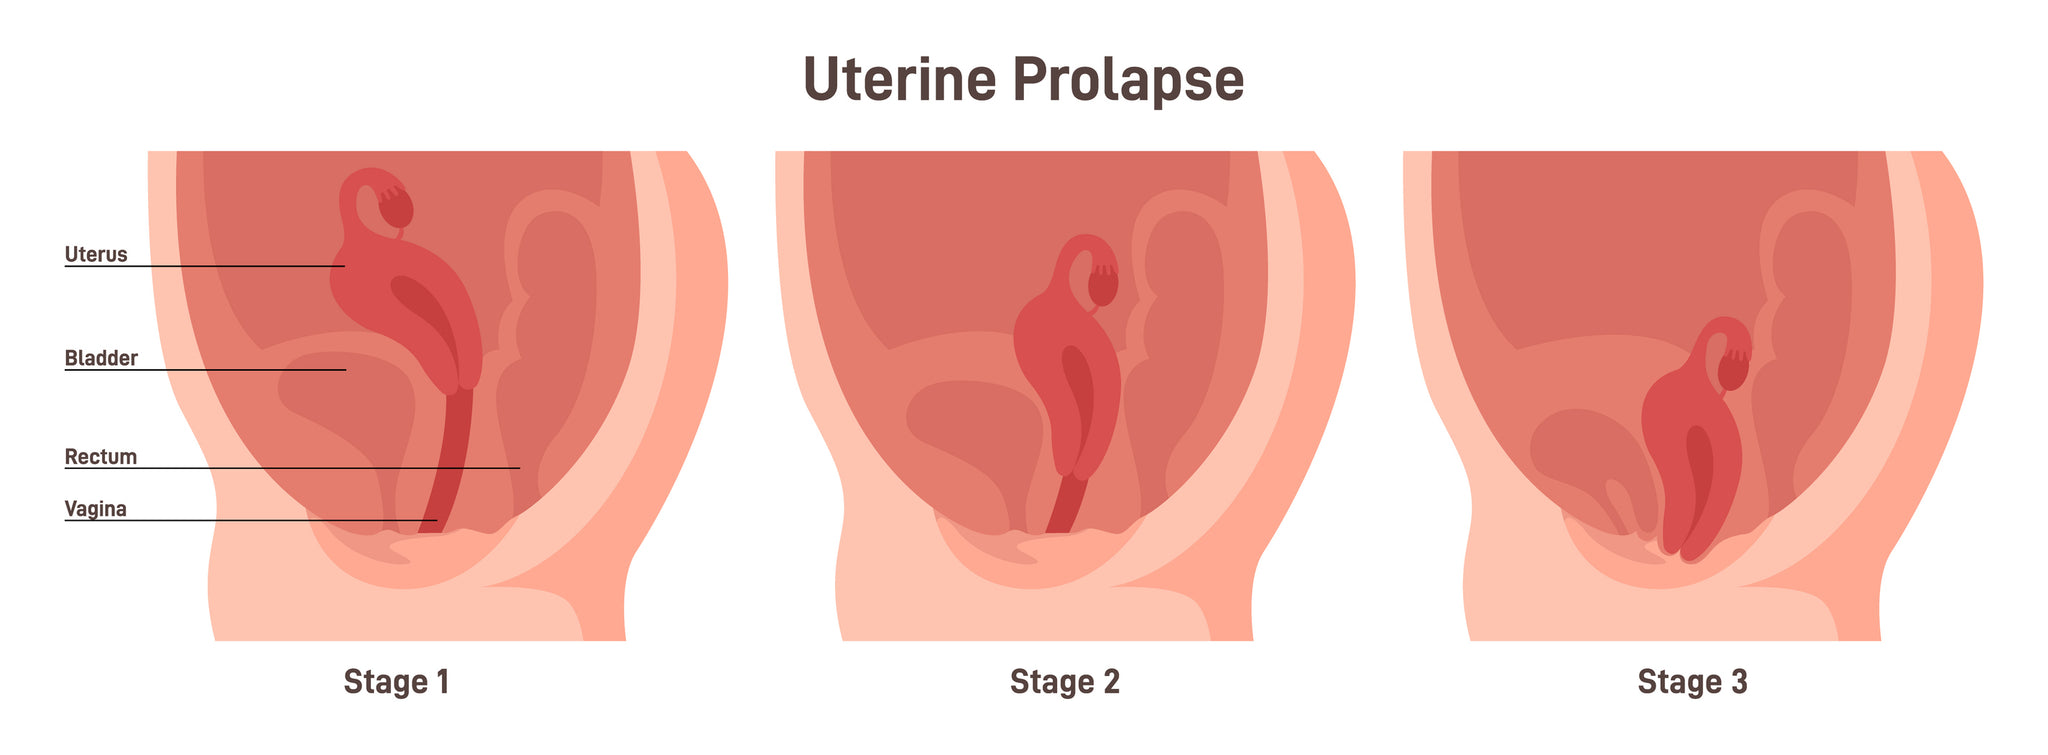 A graphic showing the stages of uterine prolapse.